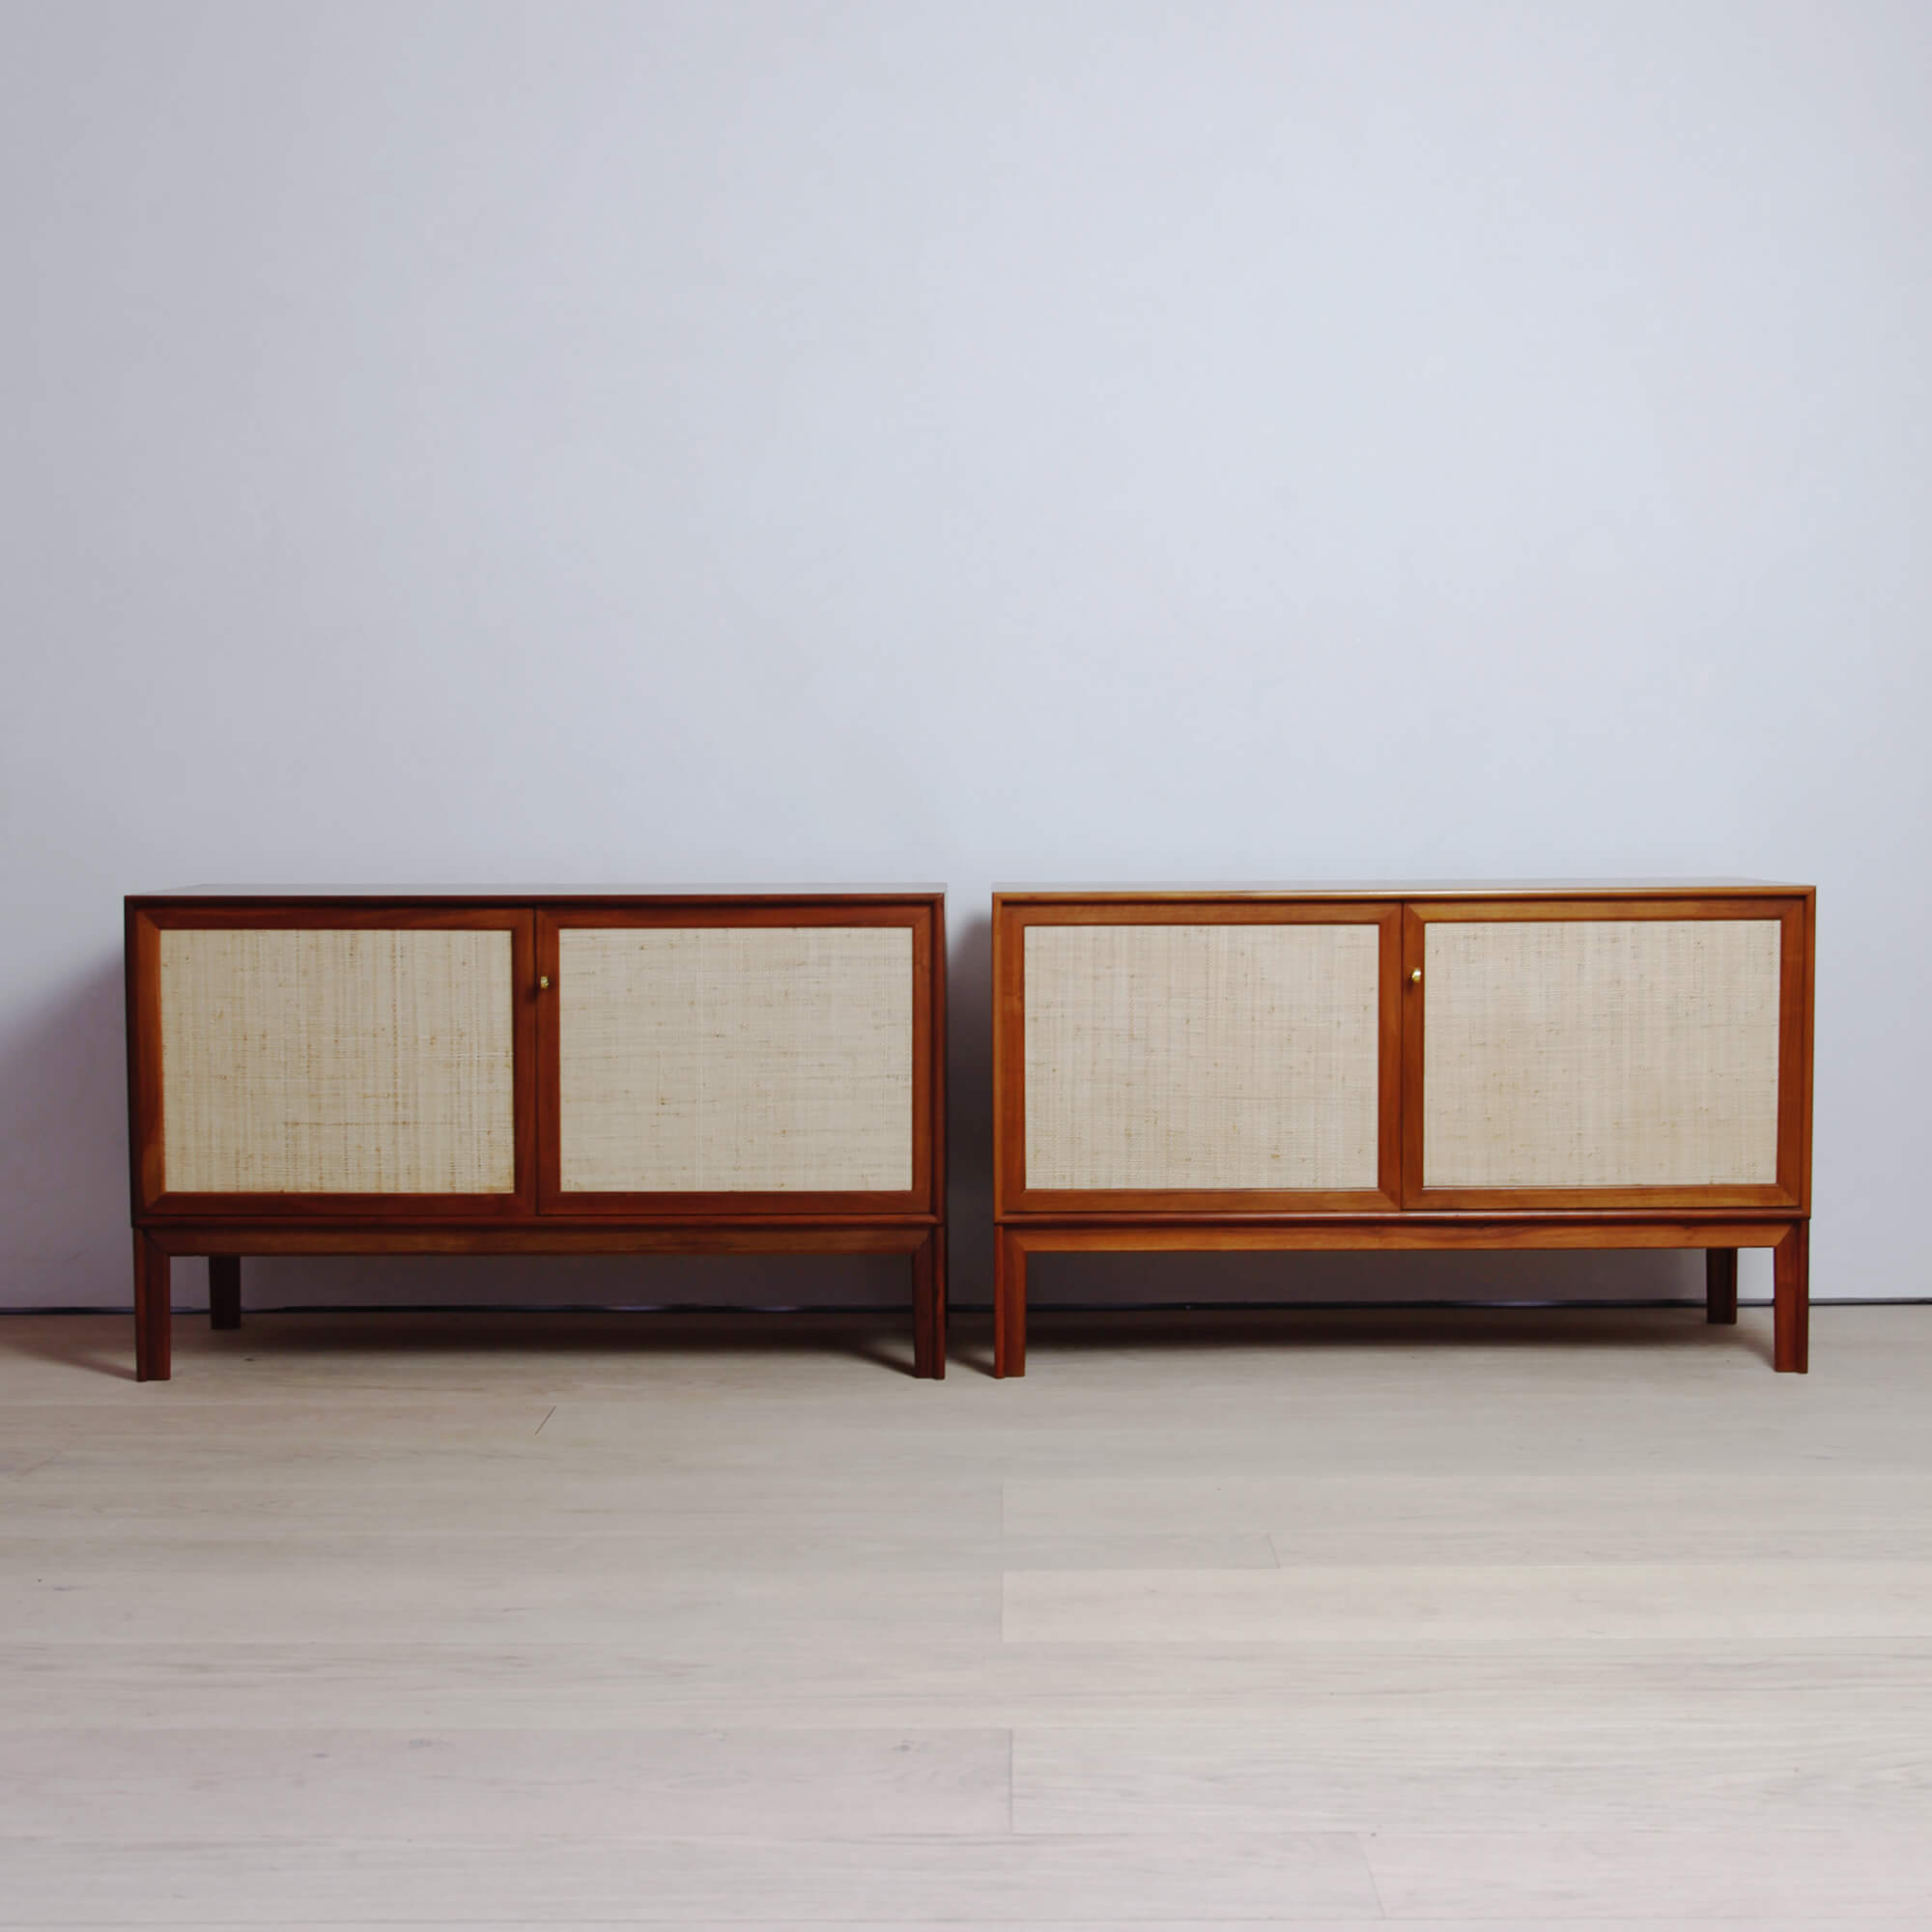 Pair of "Norrland" Cabinets by Alf Svensson